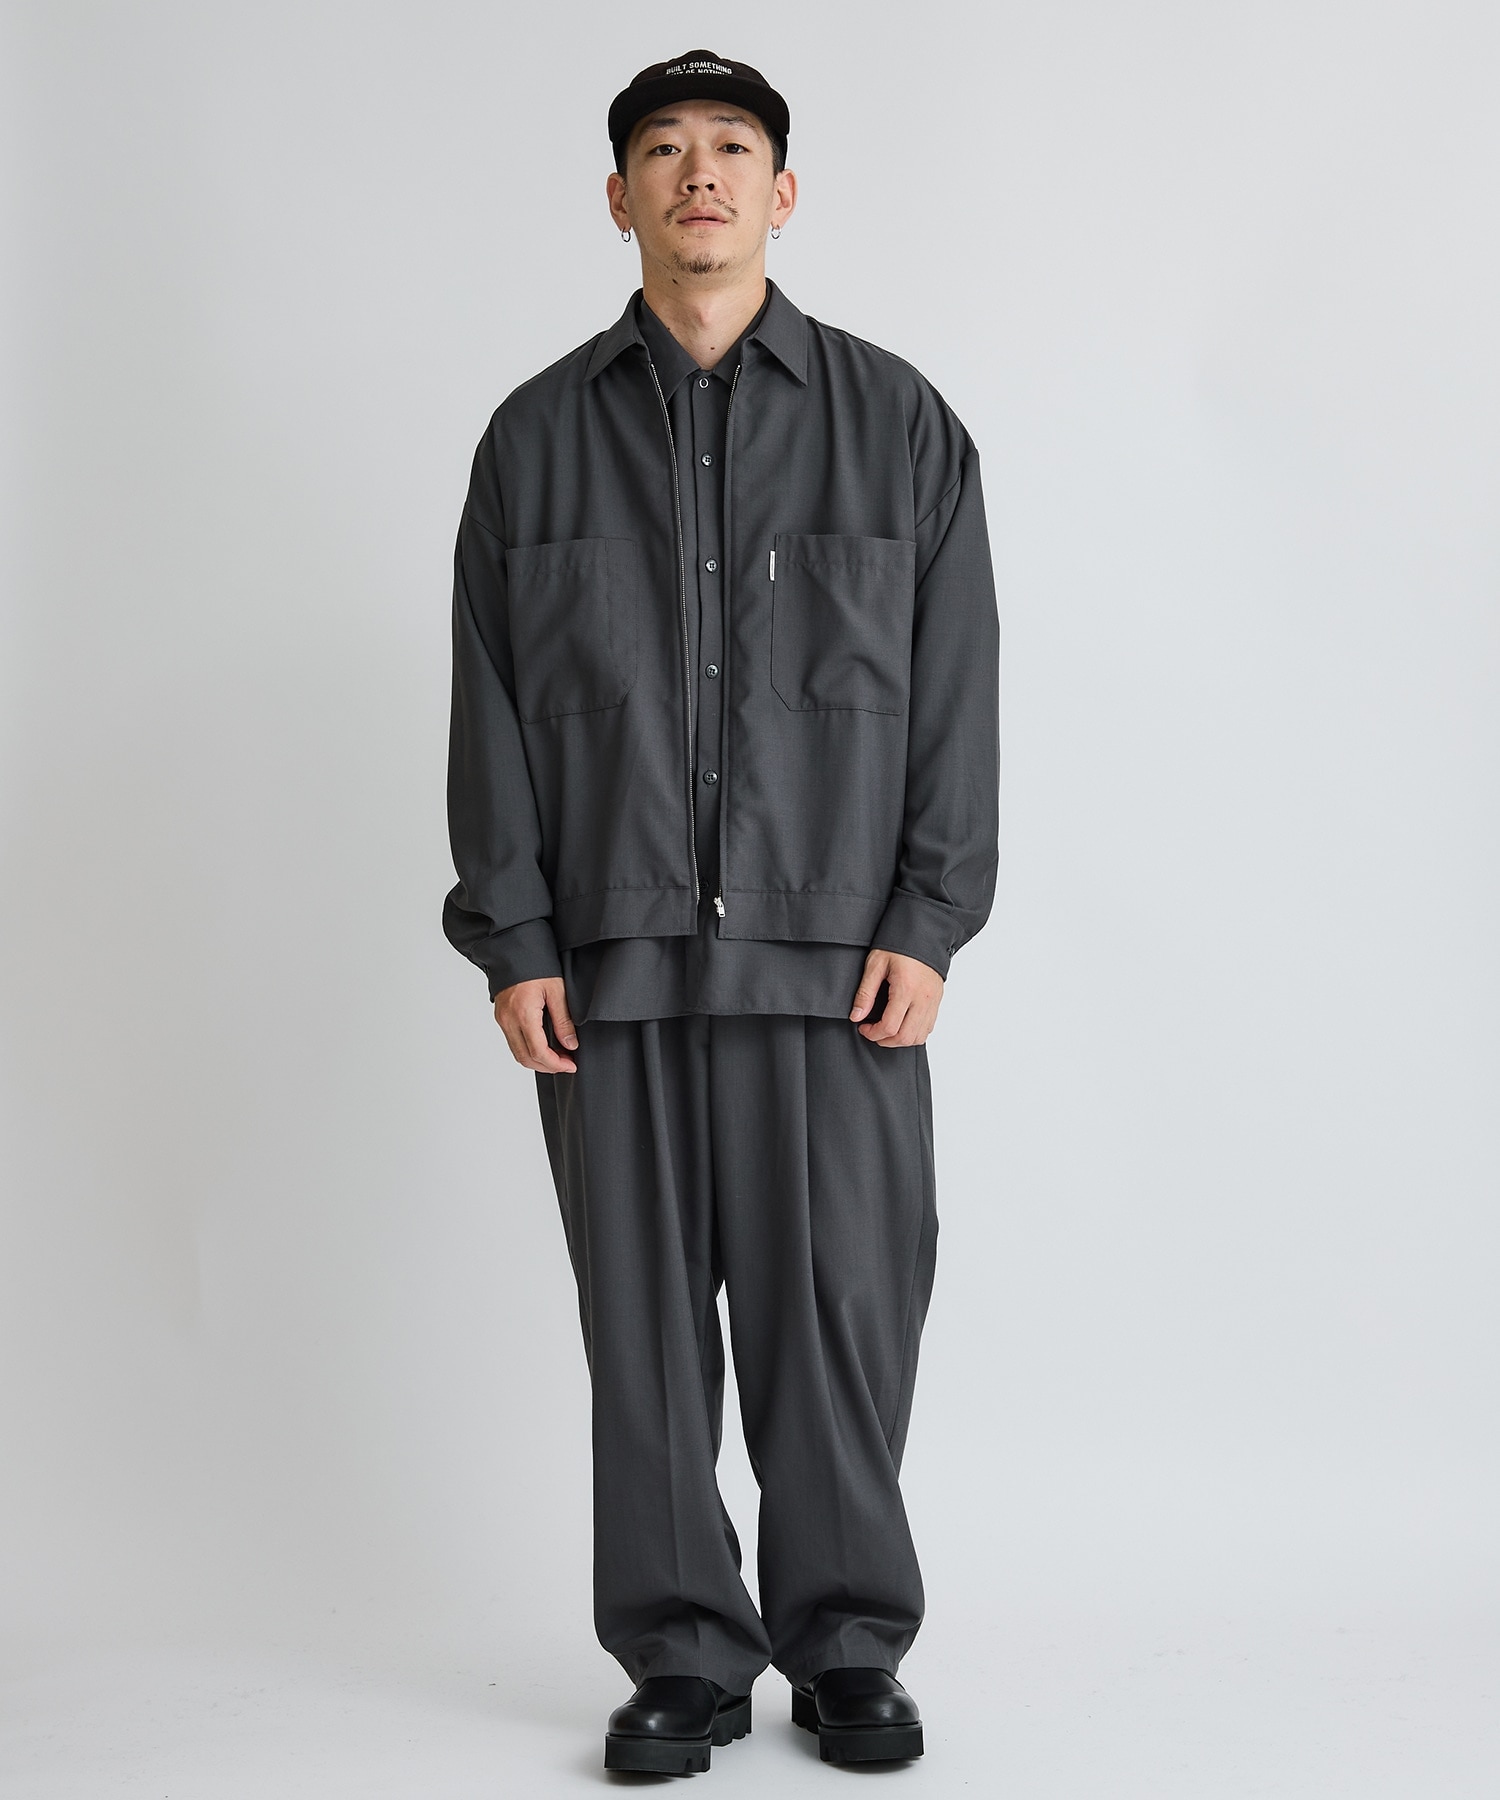 COOTIE 23ss T/W Work L/S Shirt - シャツ